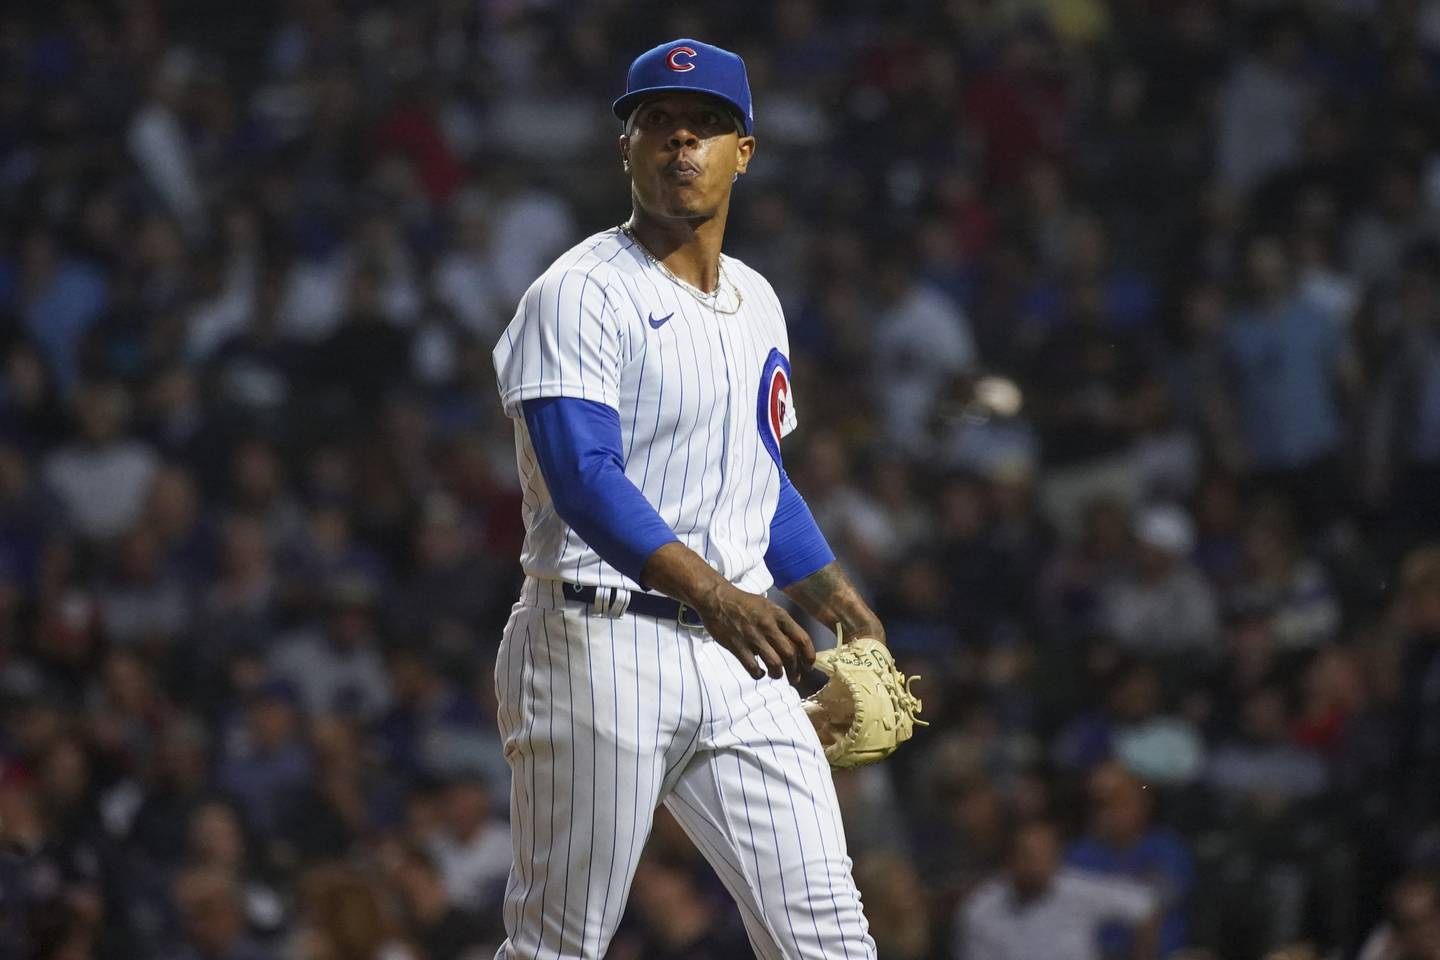 Cubs pitcher Marcus Stroman walks to the dugout during a game against the Nationals on Aug. 9, 2022, at Wrigley Field.